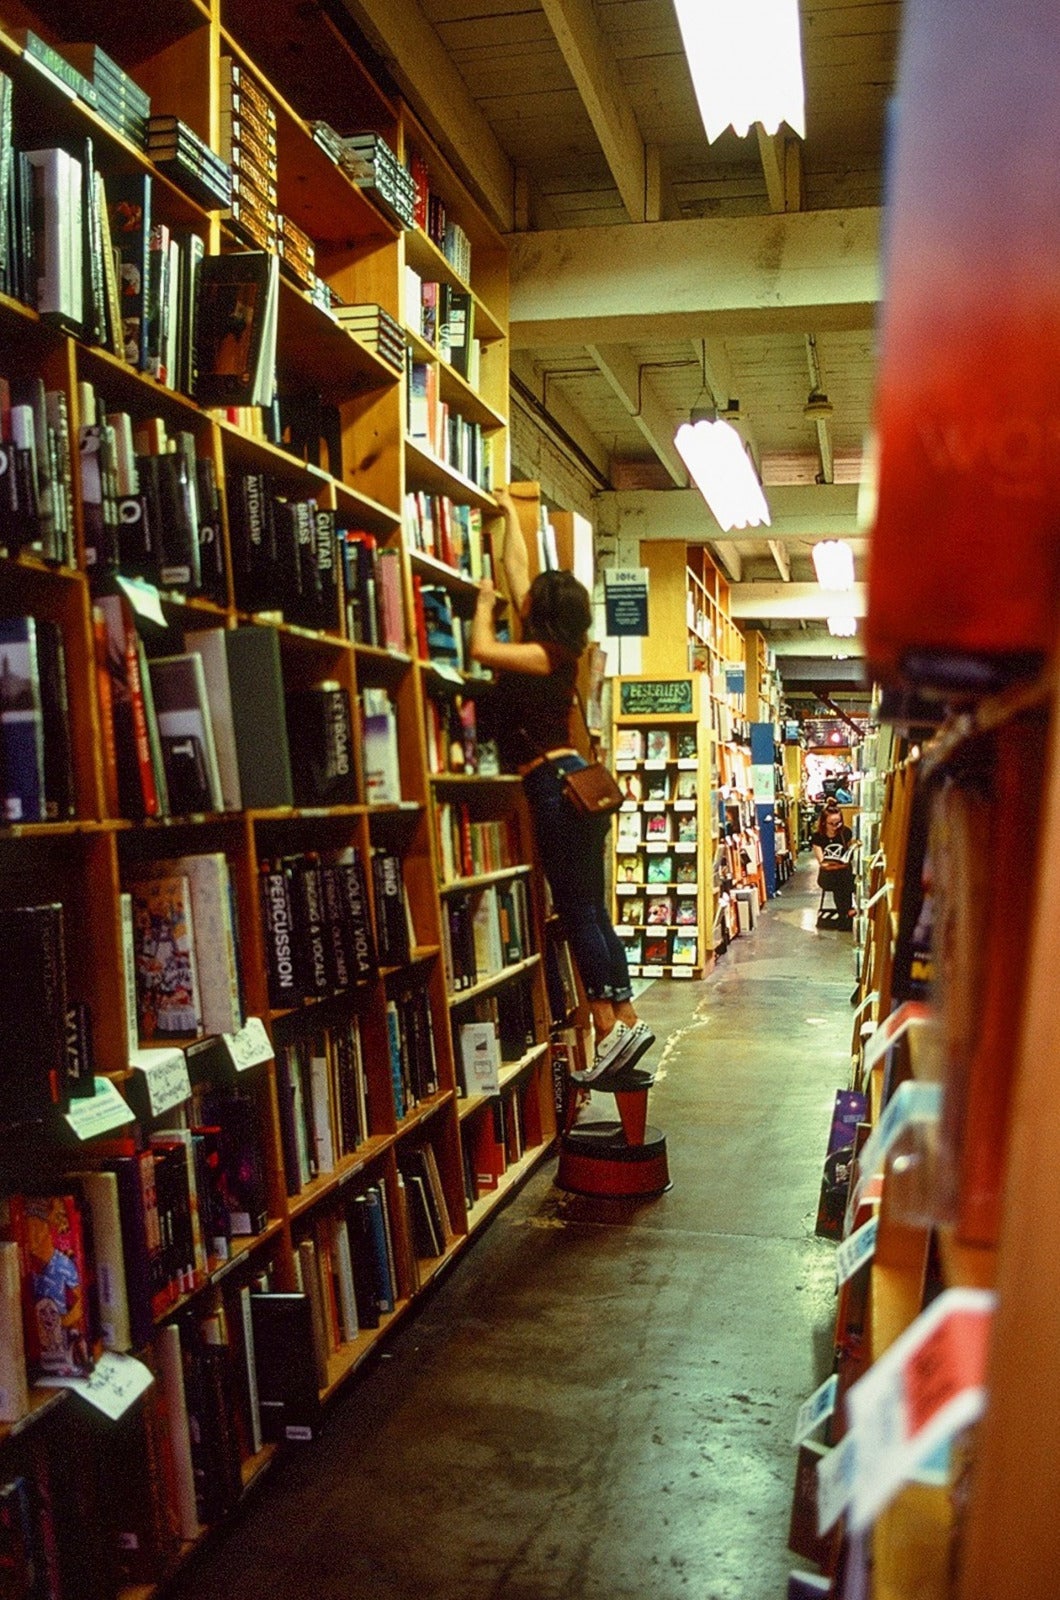 Woman on her tip toe at bookstore trying to take a book at the top shelf